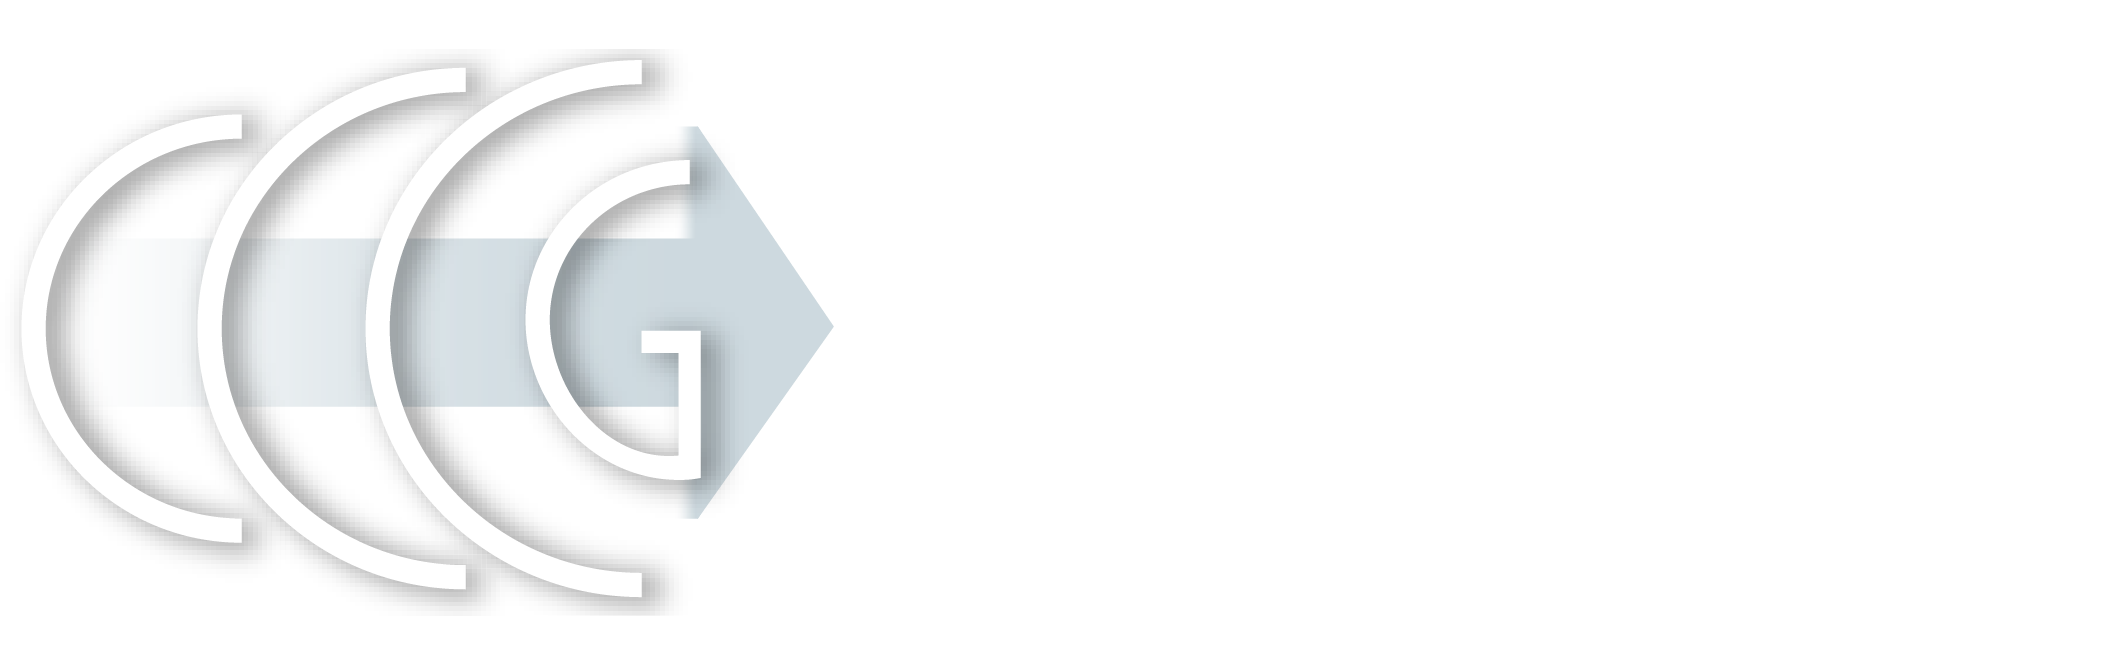 Customer Centered Consulting Group